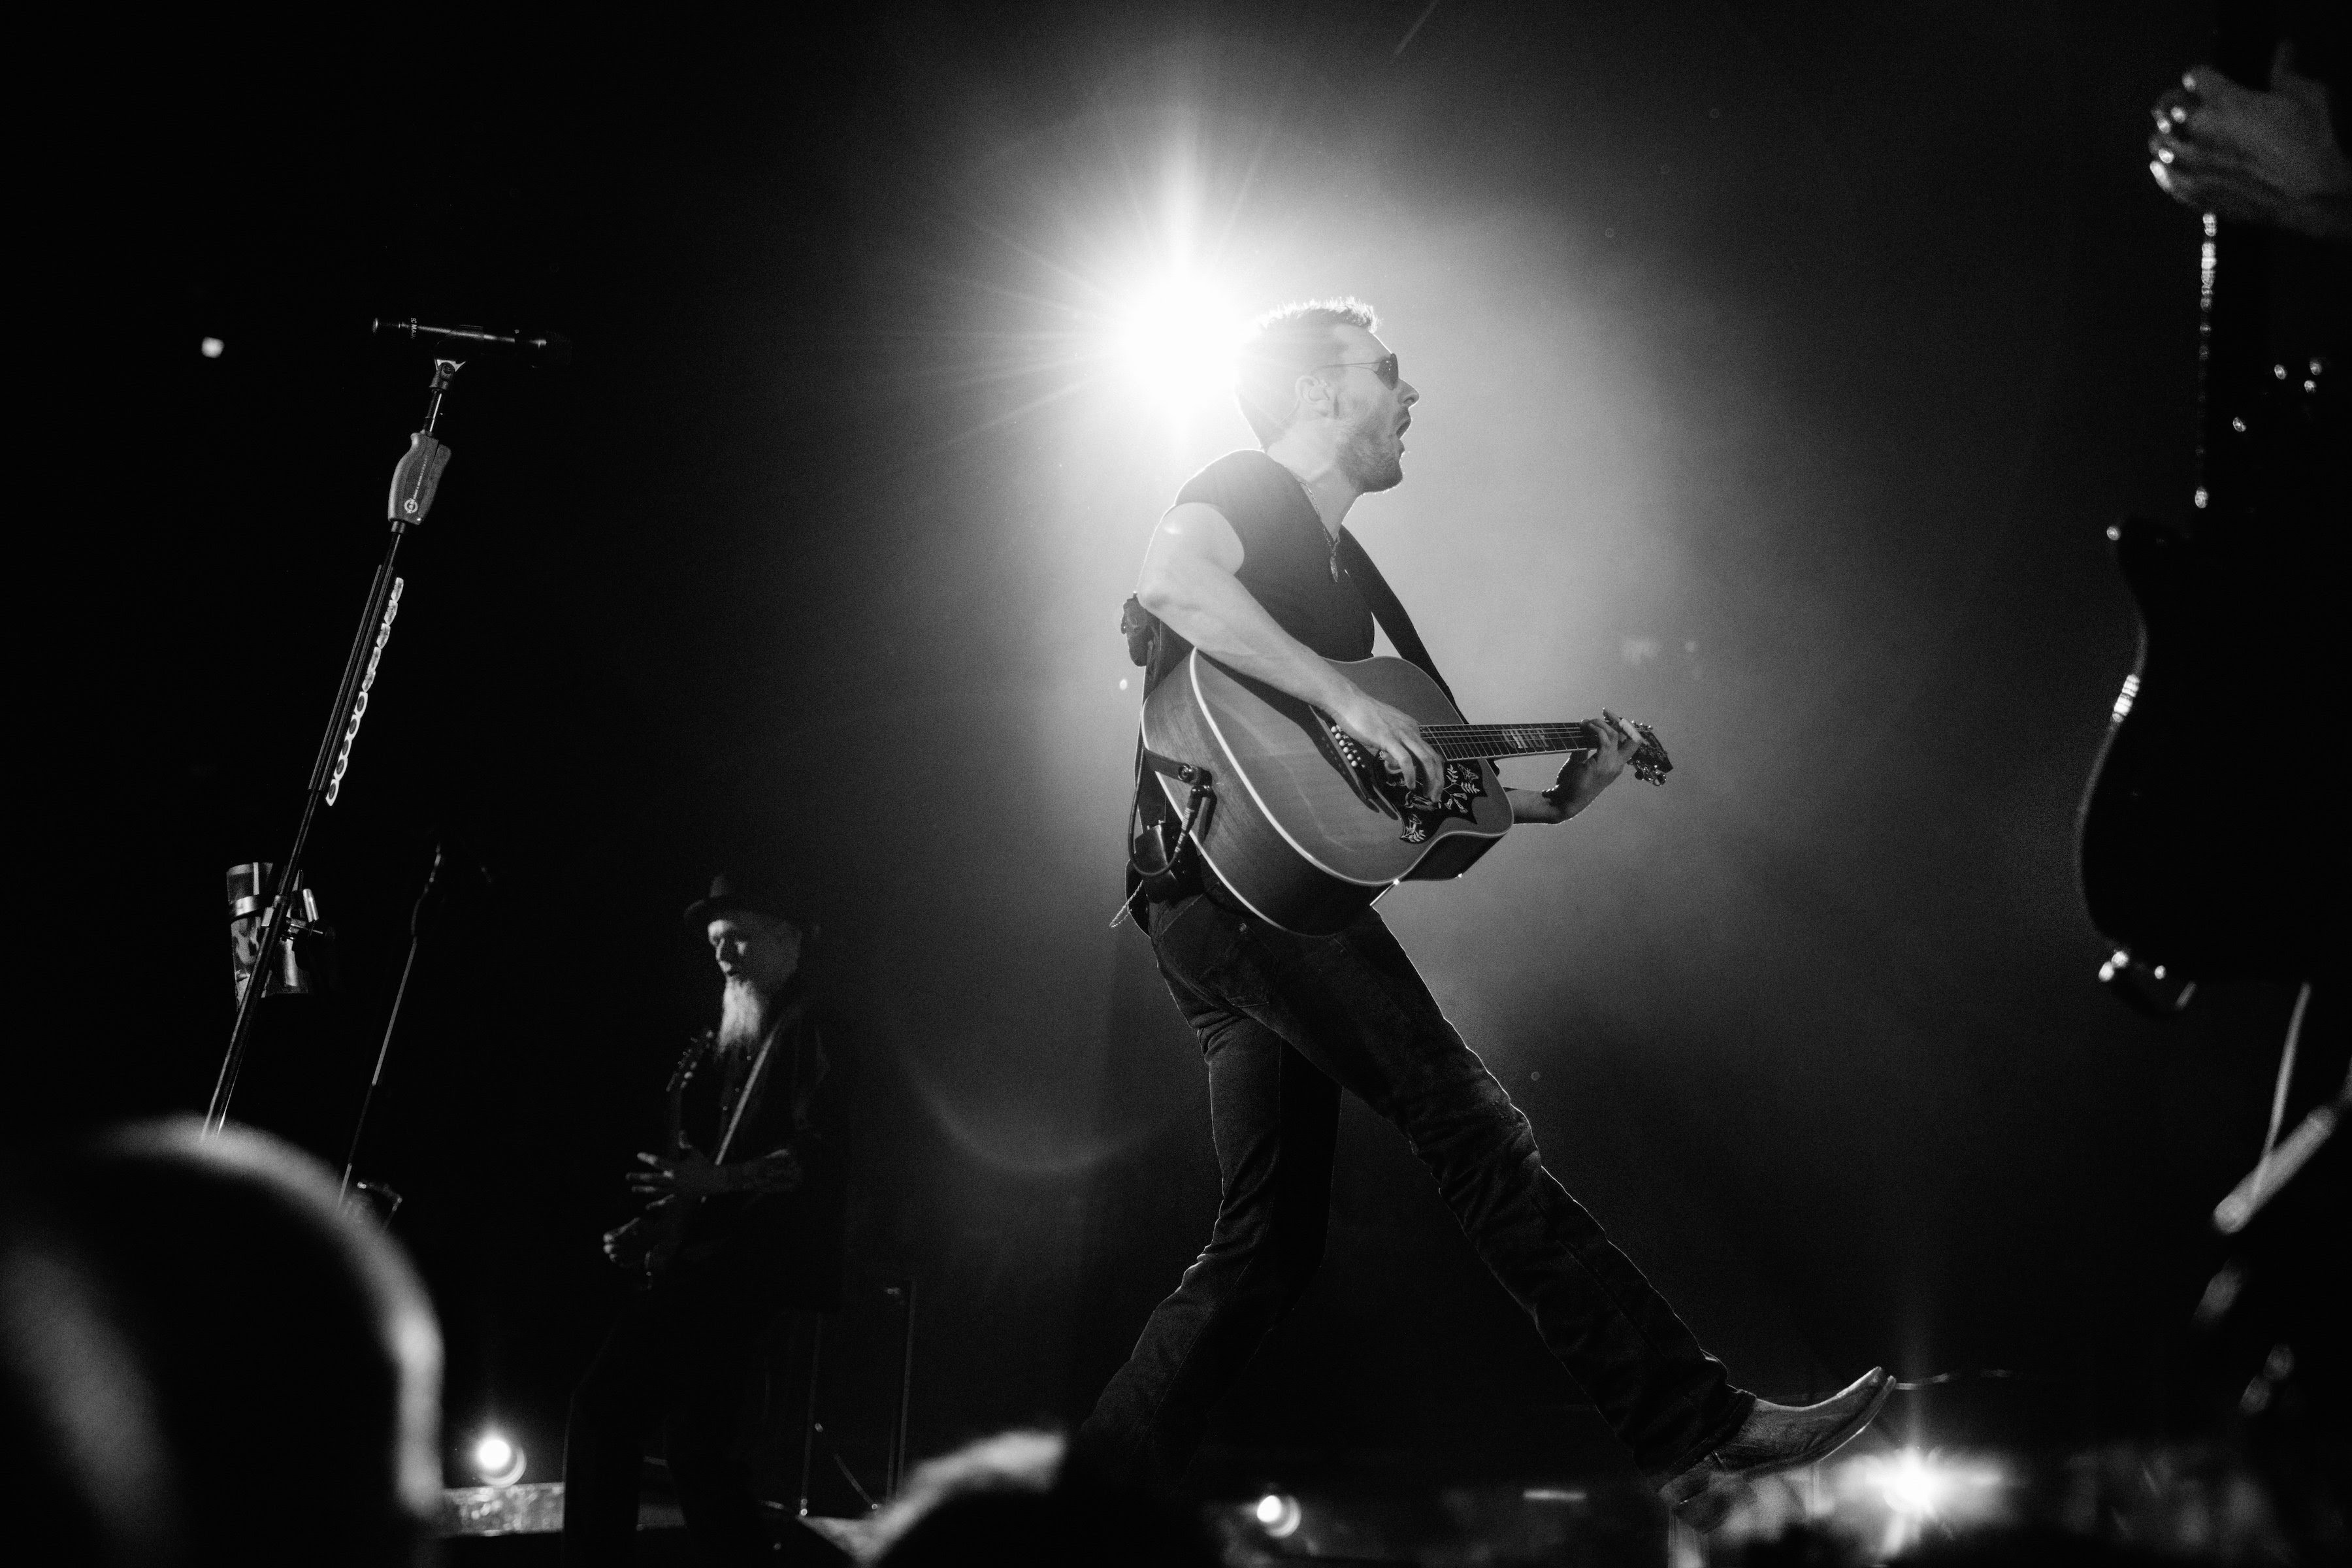 Eric Church Closes “Holdin’ My Own Tour” with 2-night Nashville Blowout